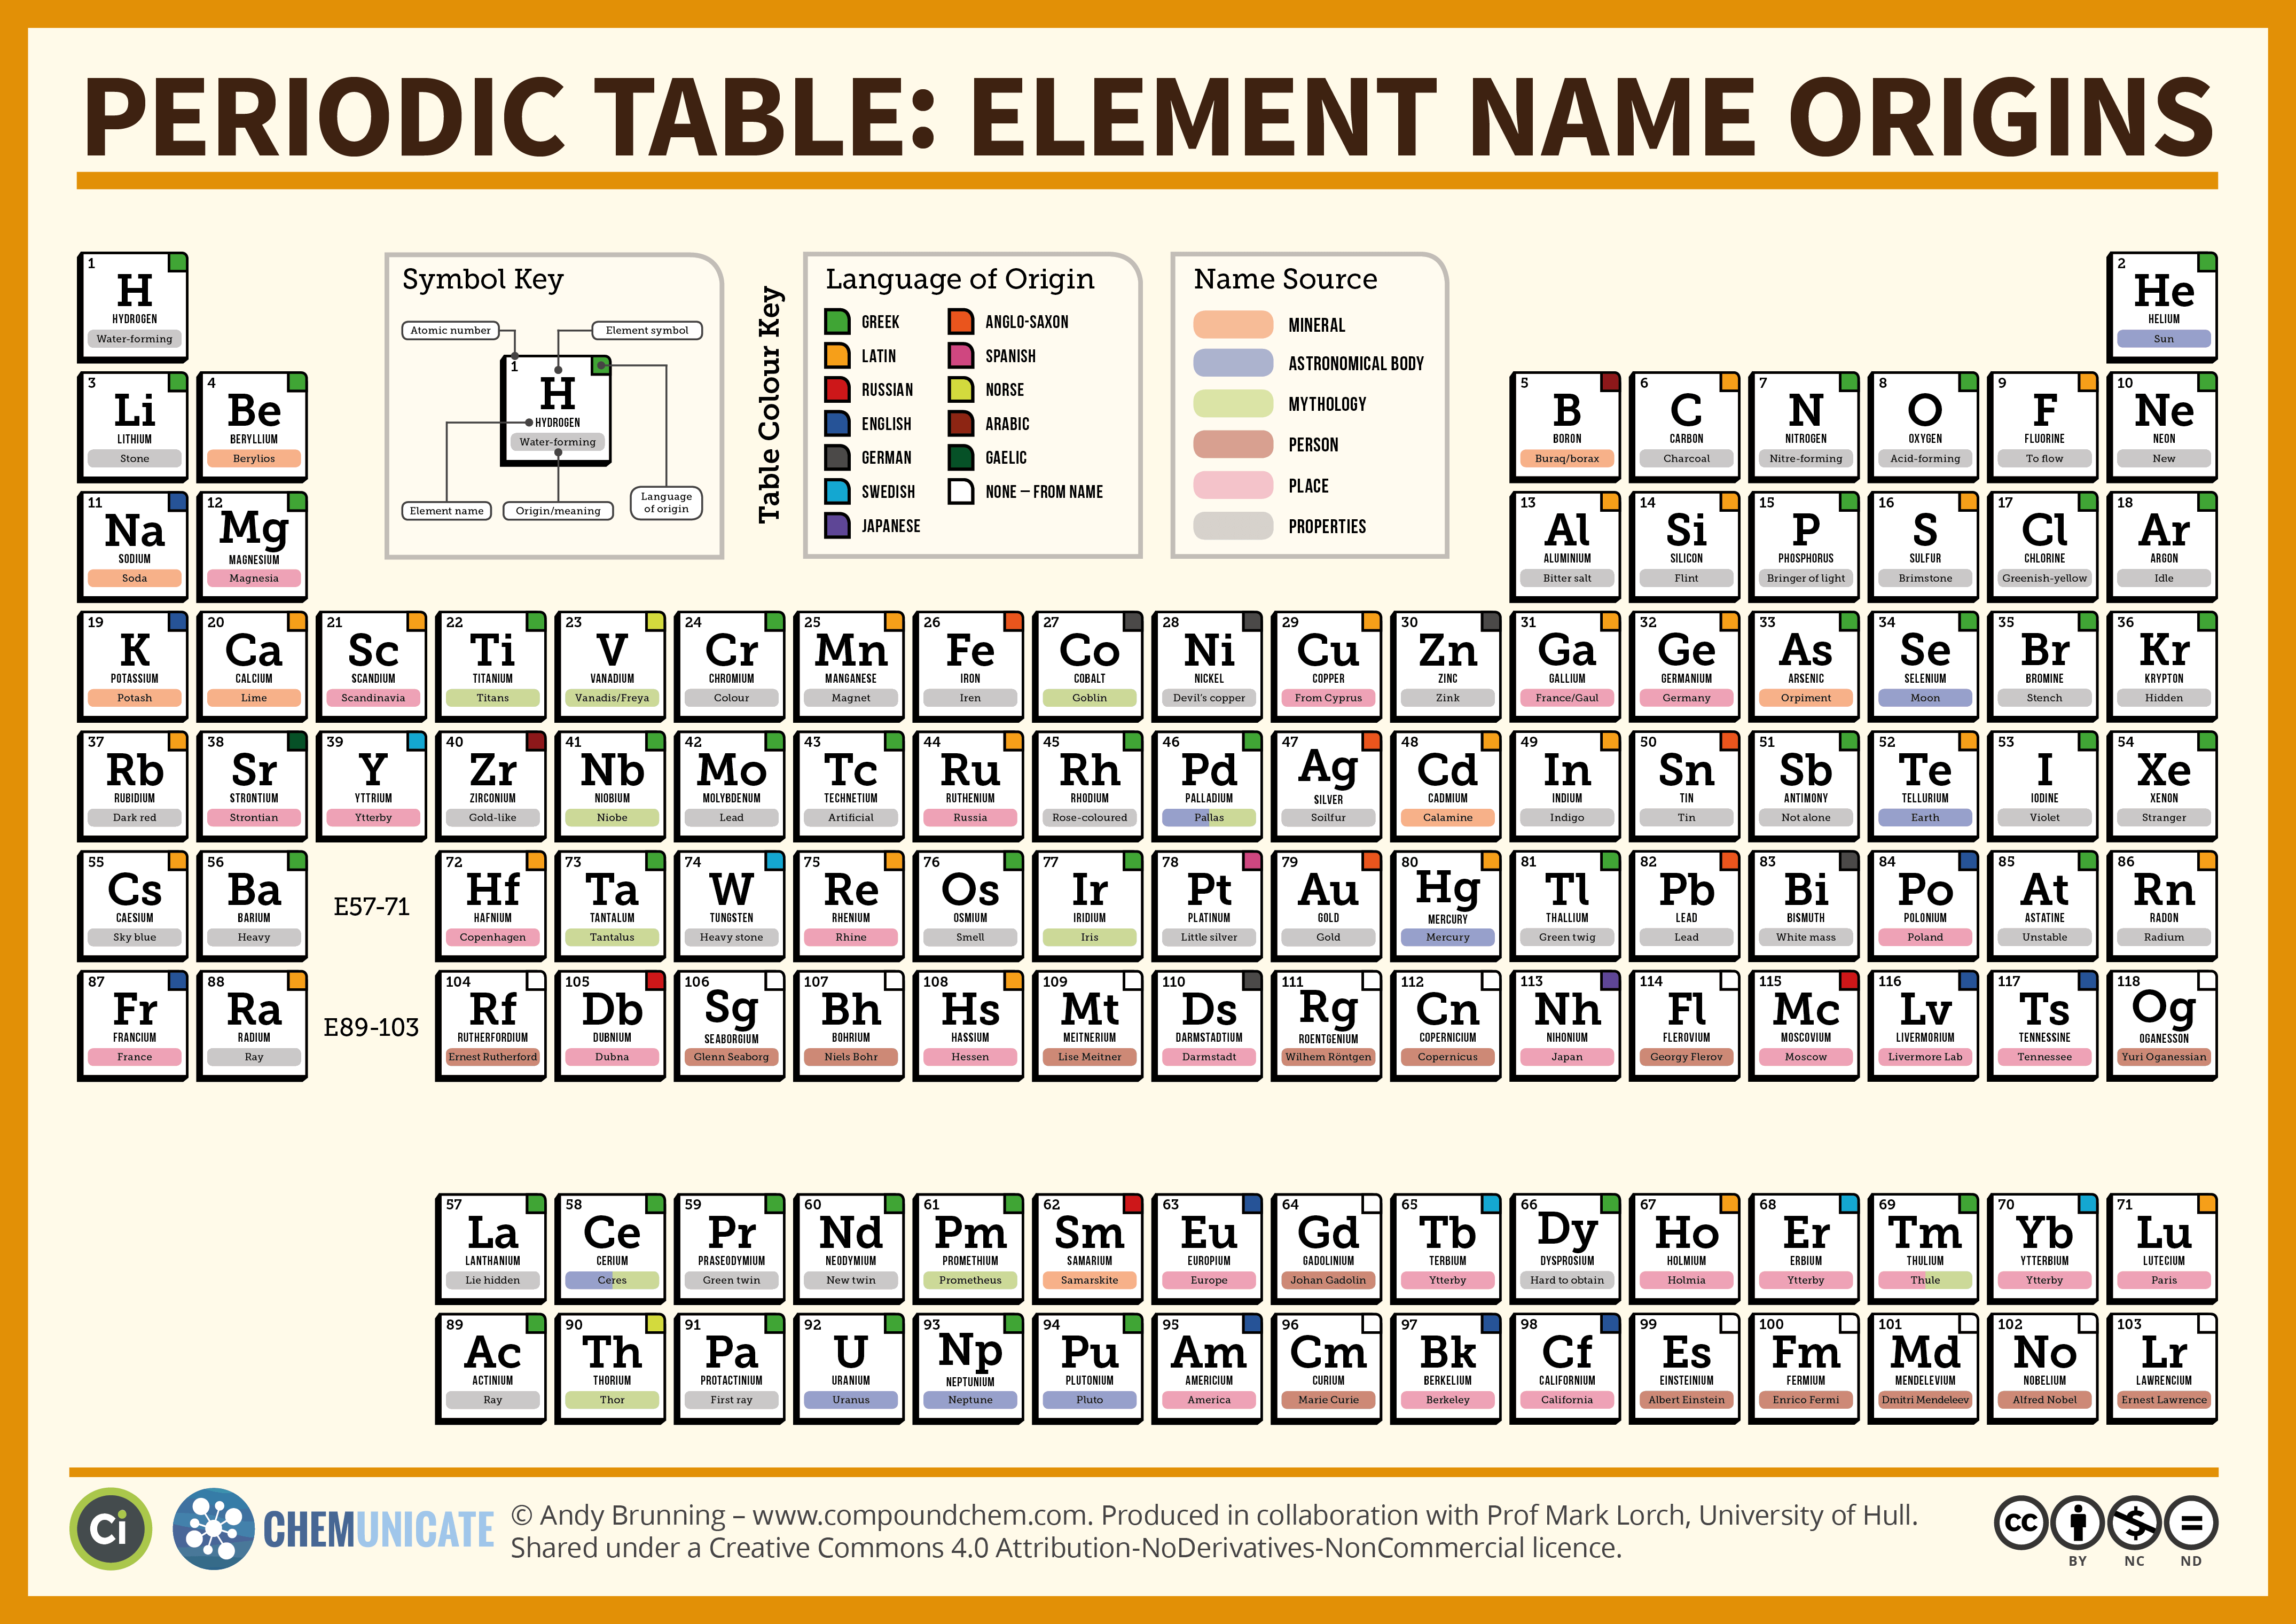 http://www.compoundchem.com/wp-content/uploads/2016/06/The-Periodic-Table-Element-Name-Origins-L.png